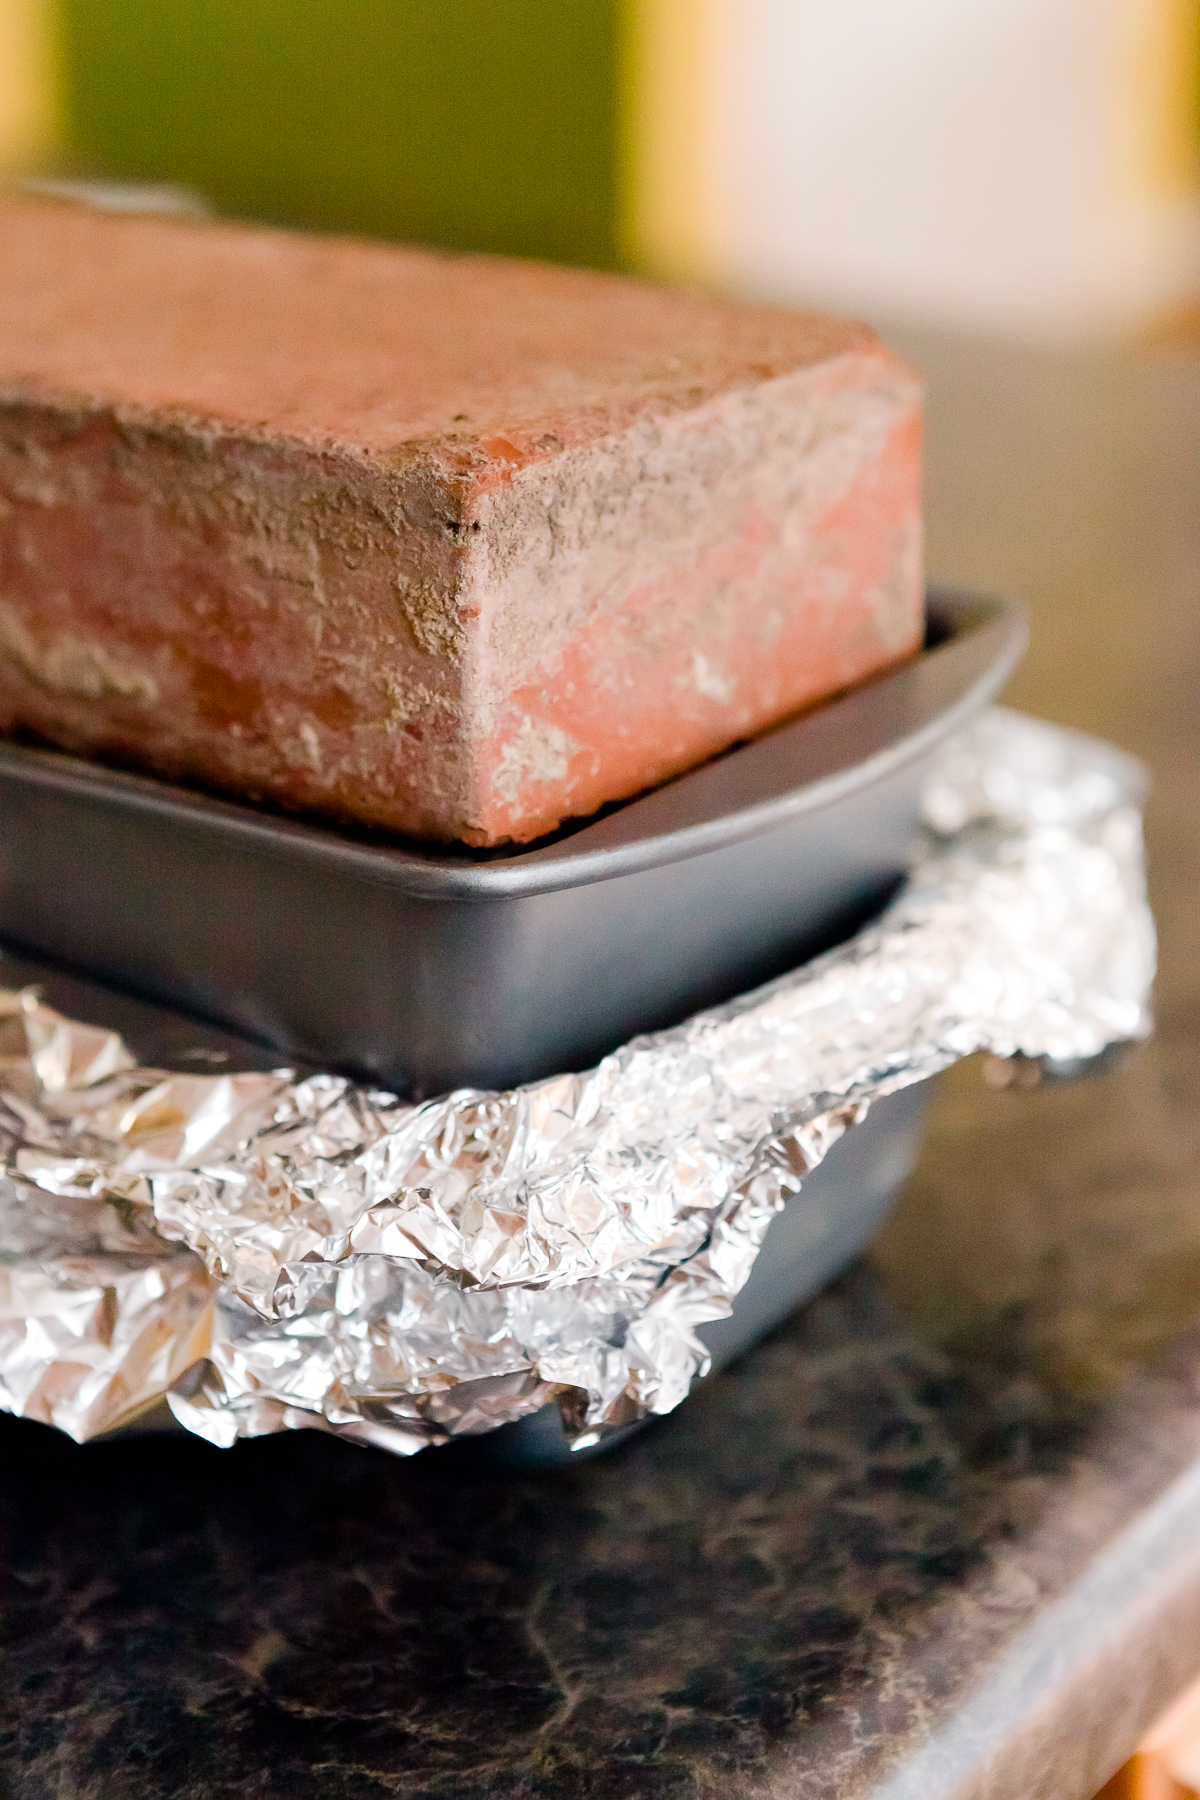 view of bricks in a loaf pan pressing down on covered, drained homemade Spam in another loaf pan